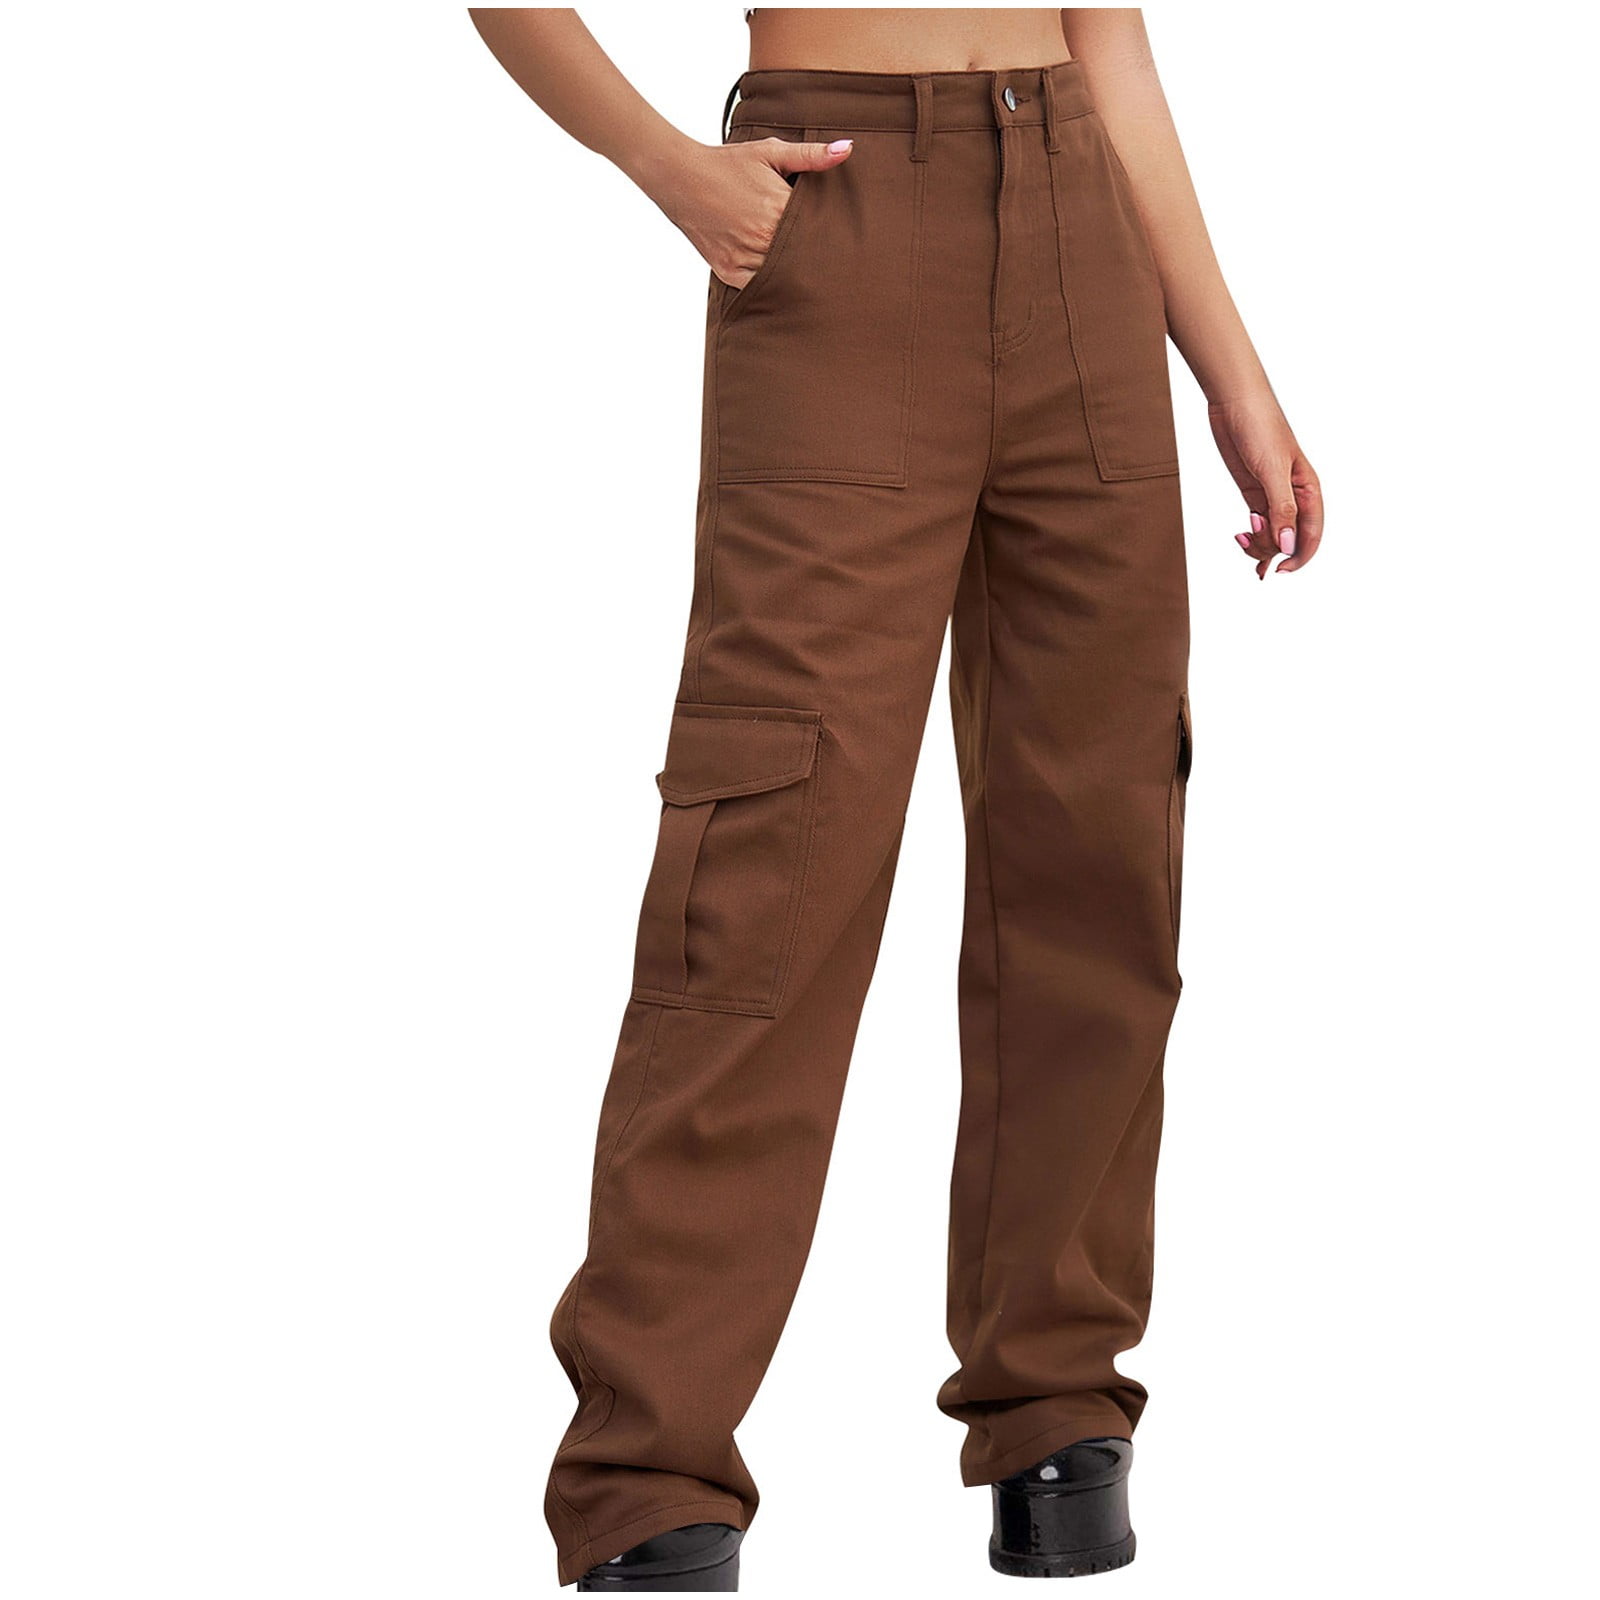 Aueoeo High Waist Stretch Cargo Pants Women Baggy Jeans with Pockets  Relaxed Fit Straight Wide Leg Denim Pants